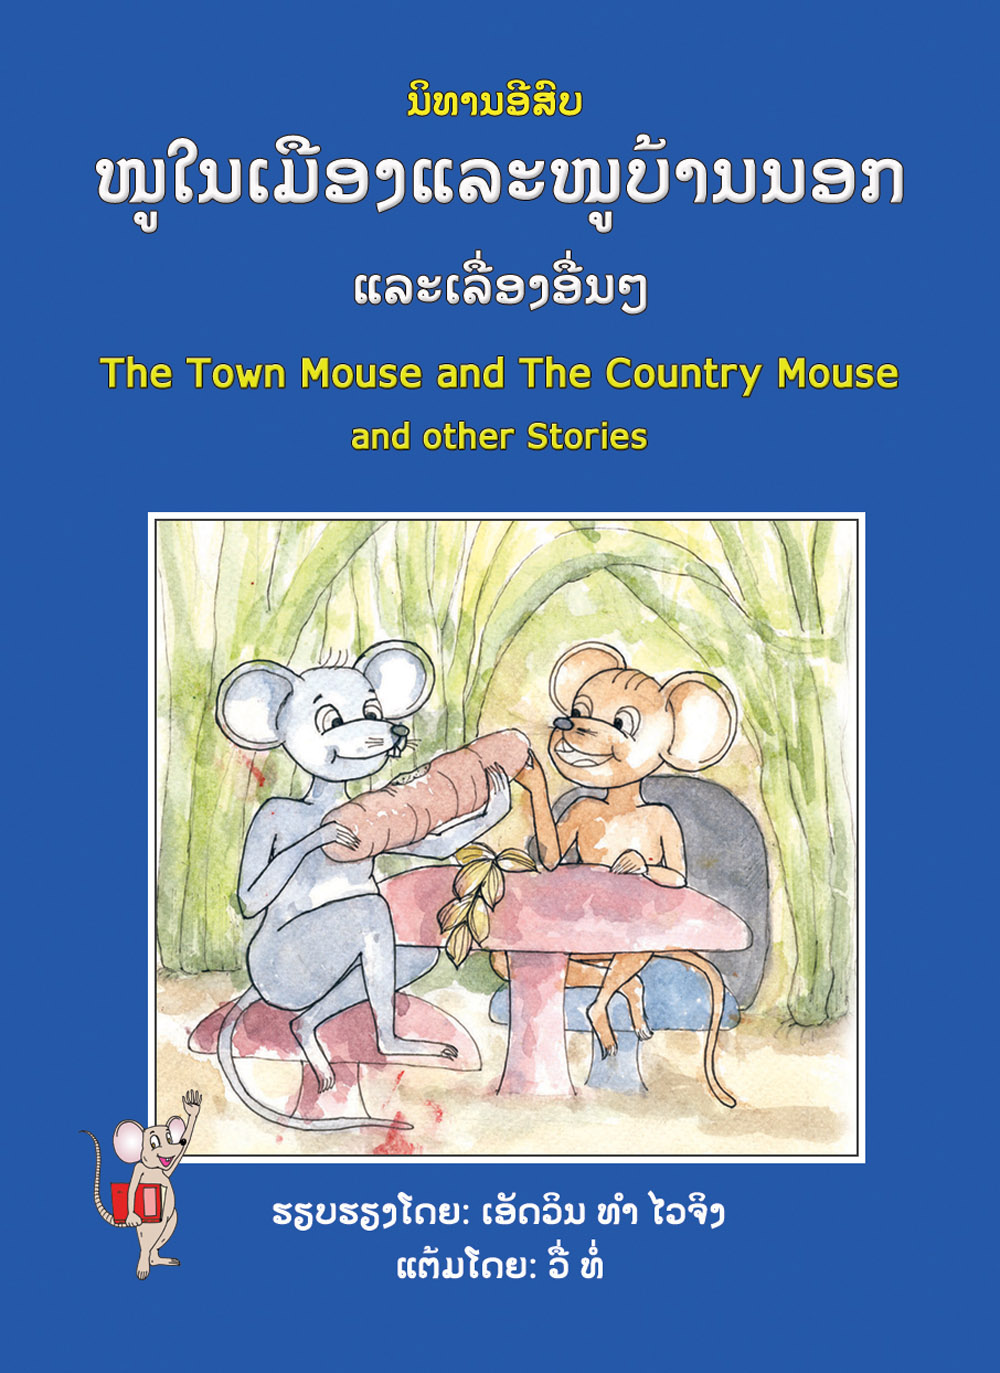 The Town Mouse and the Country Mouse large book cover, published in Lao and English